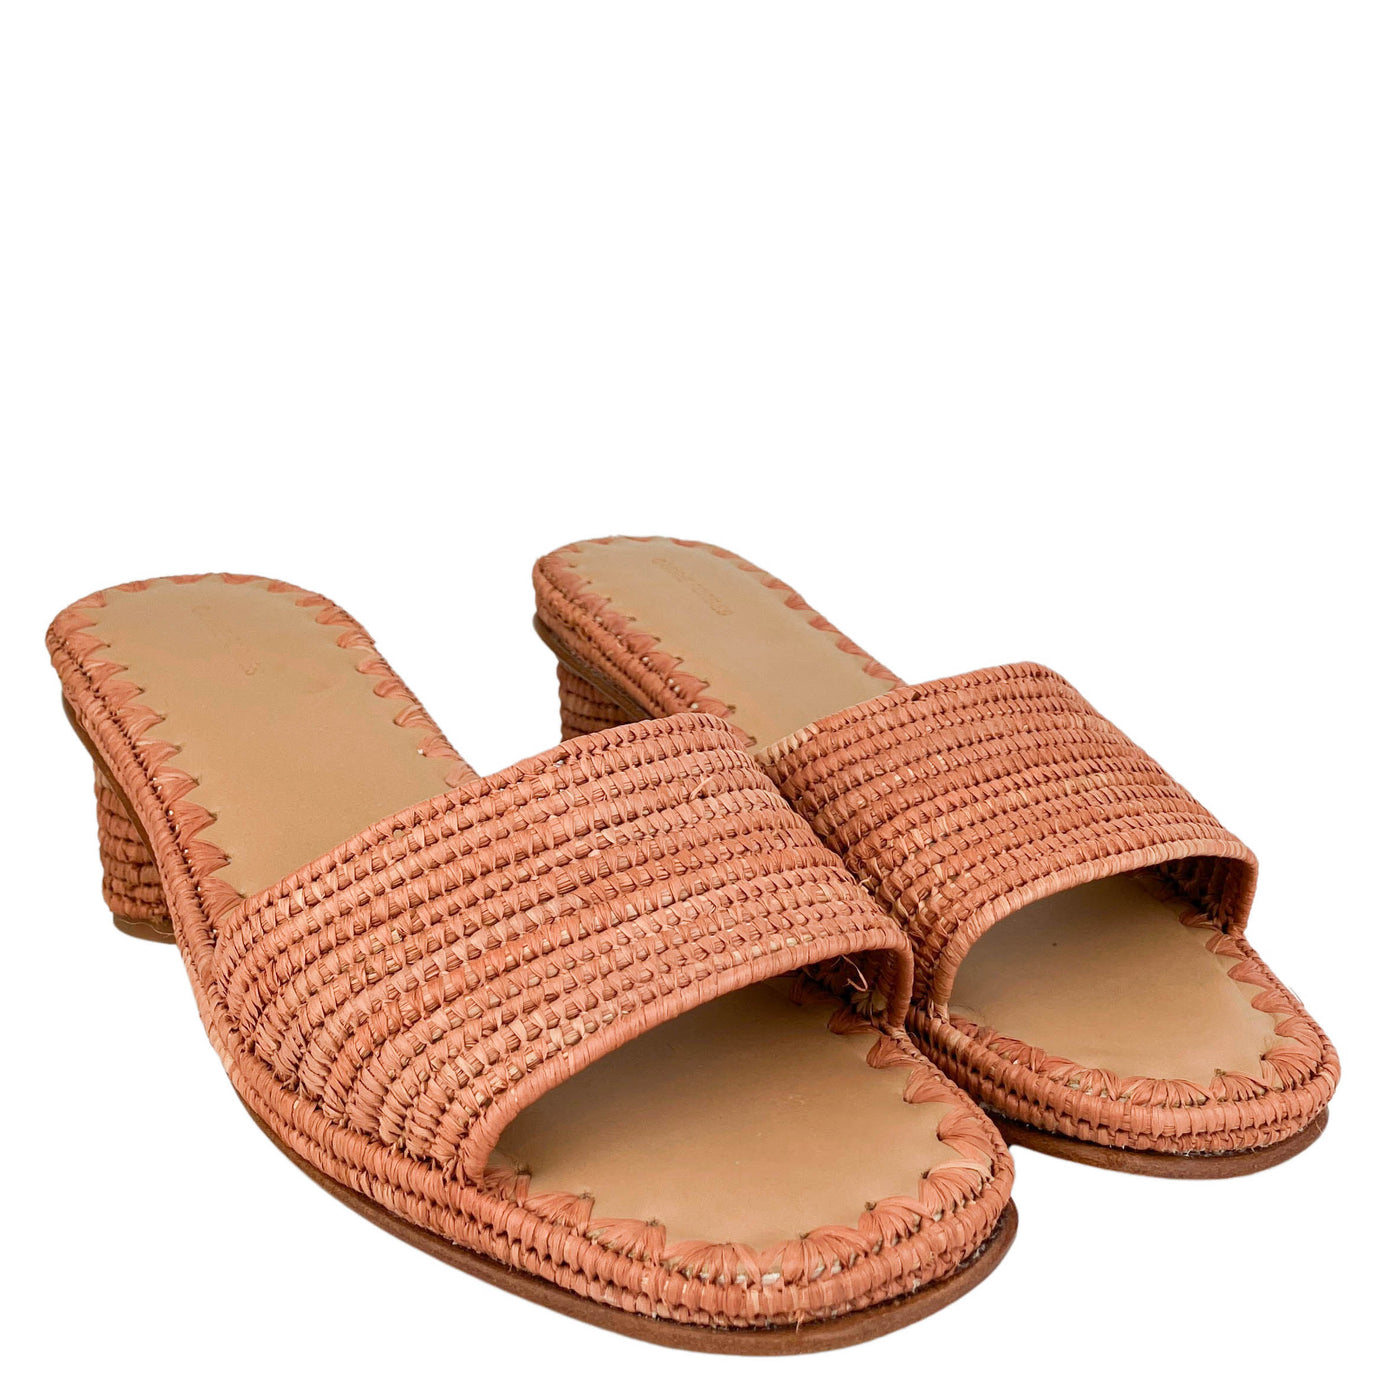 Carrie Forbes Bou Mules in Terracotta - Discounts on Carrie Forbes at UAL